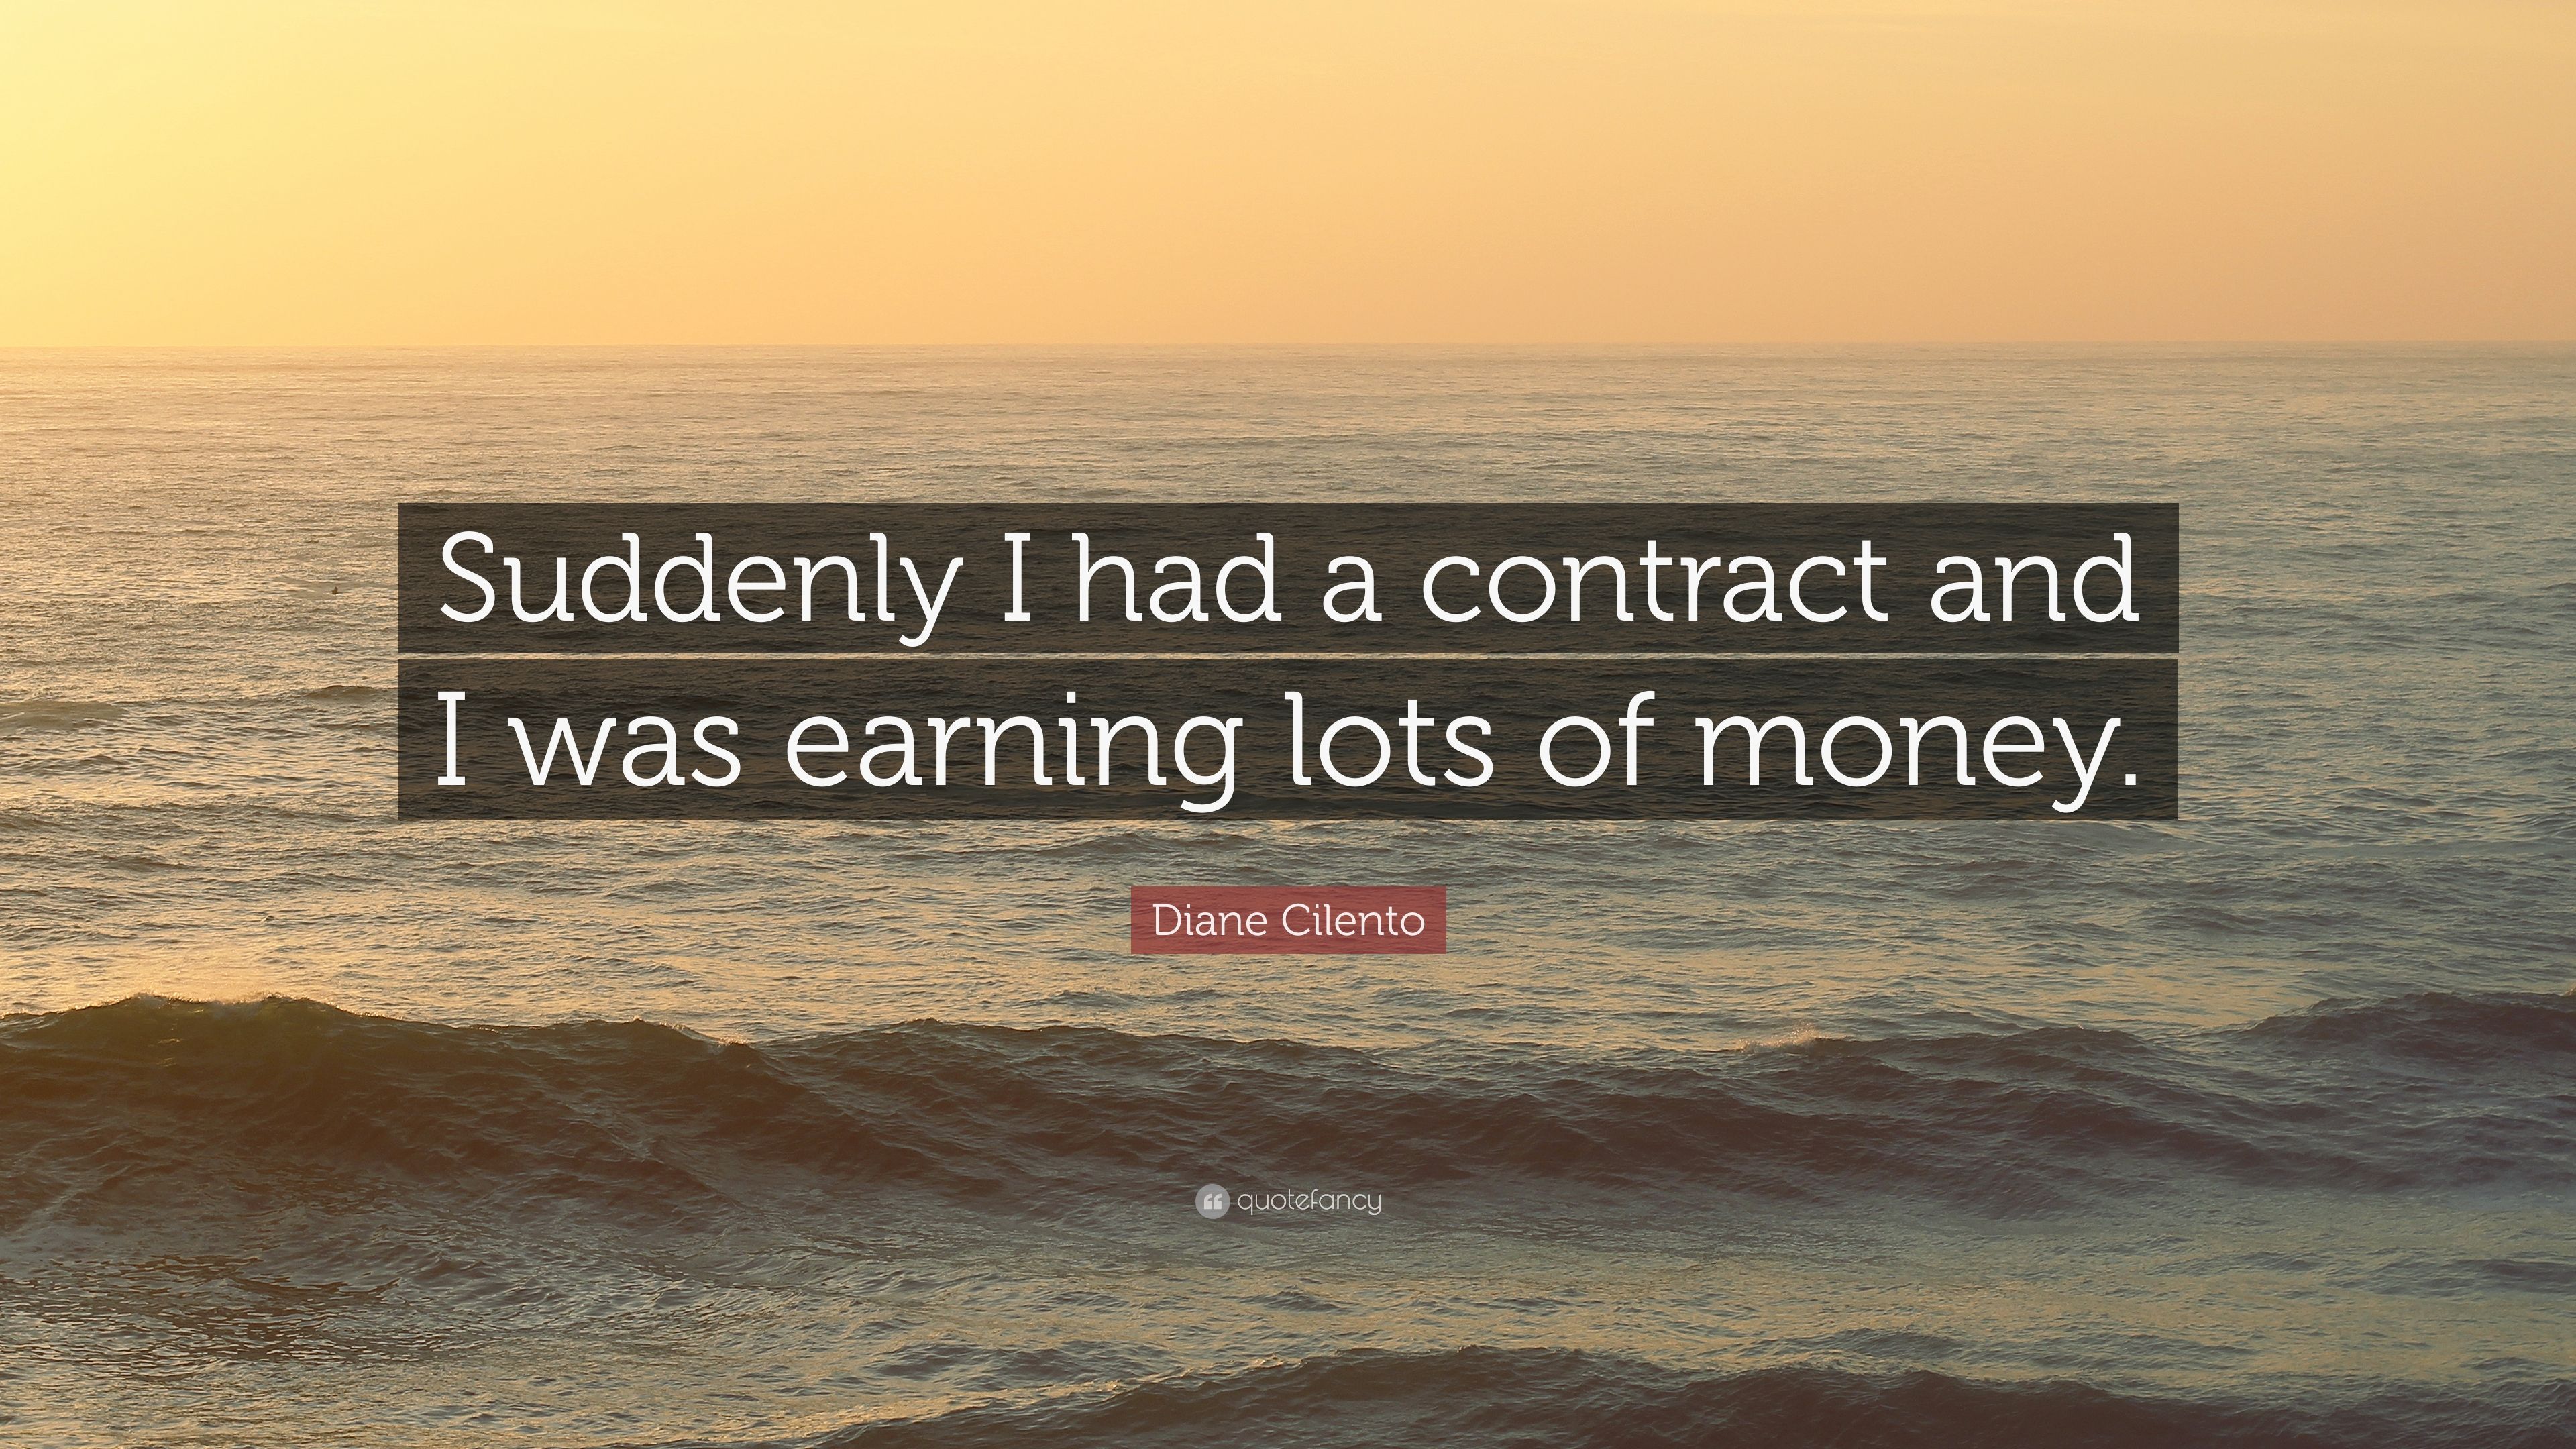 Diane Cilento Quote: “Suddenly I had a contract and I was earning lots of money.” (7 wallpaper)